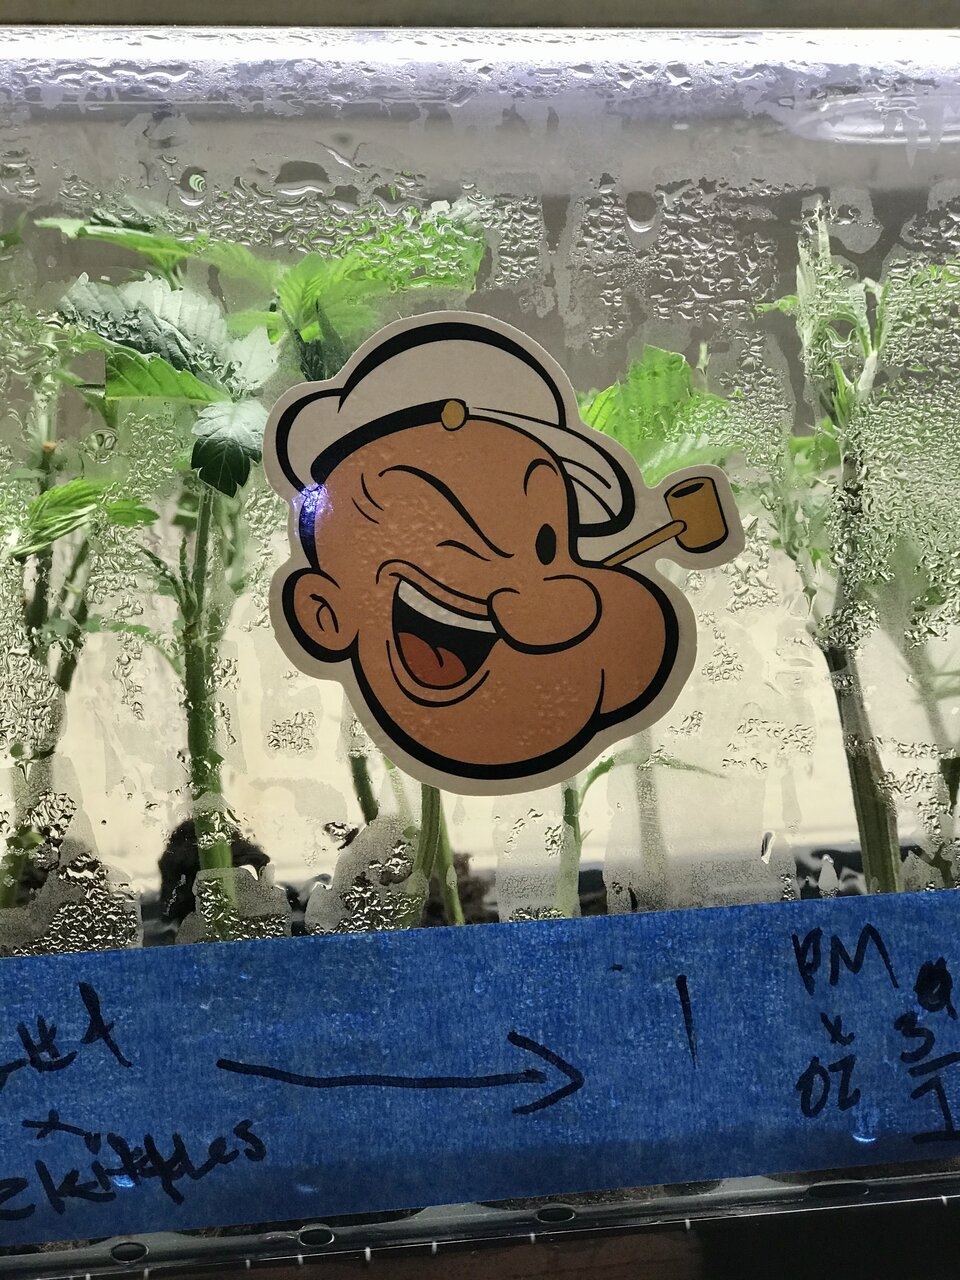 Popeye eats spinach